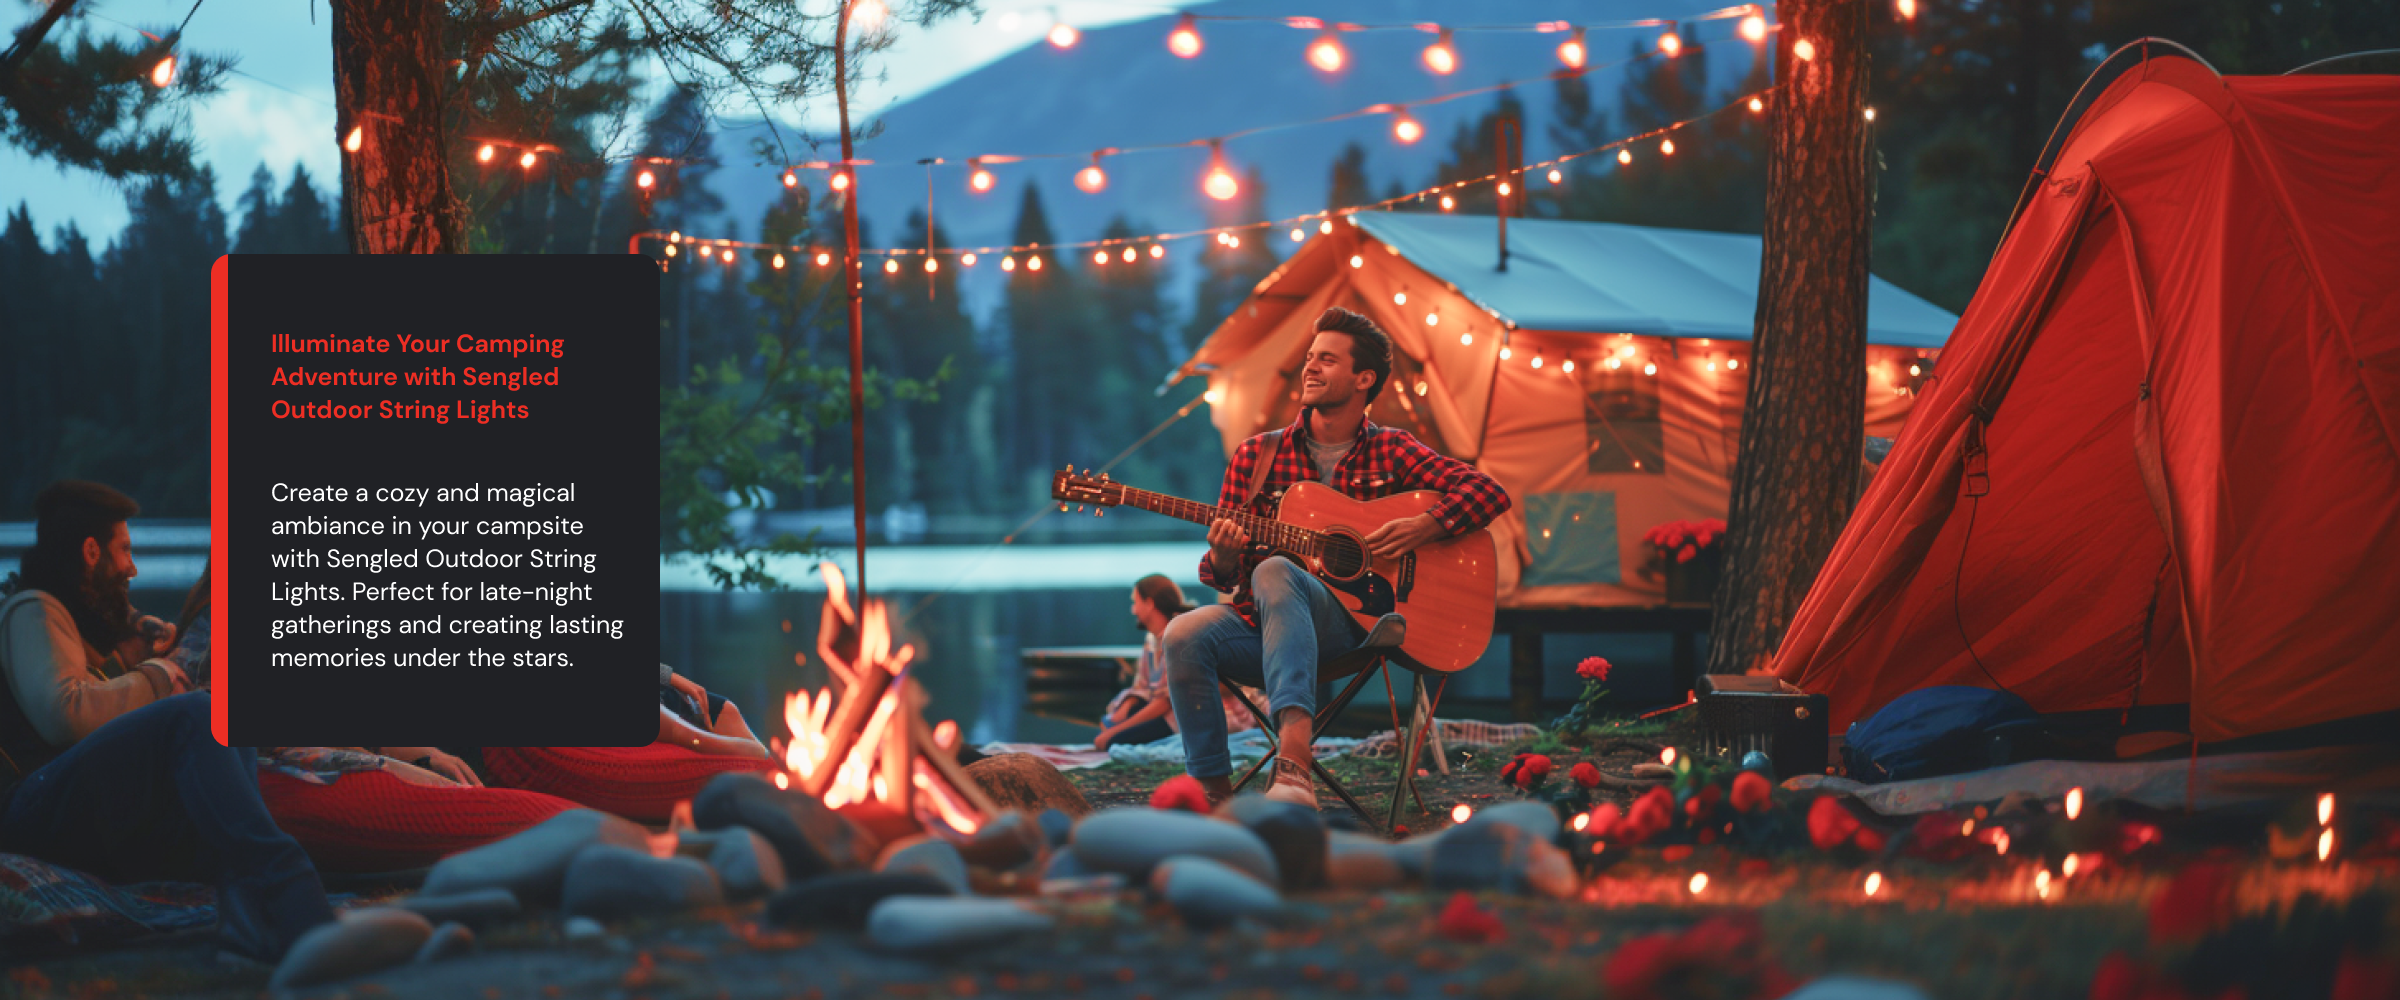 Illuminate Your Camping Adventure with Sengled Outdoor String Lights